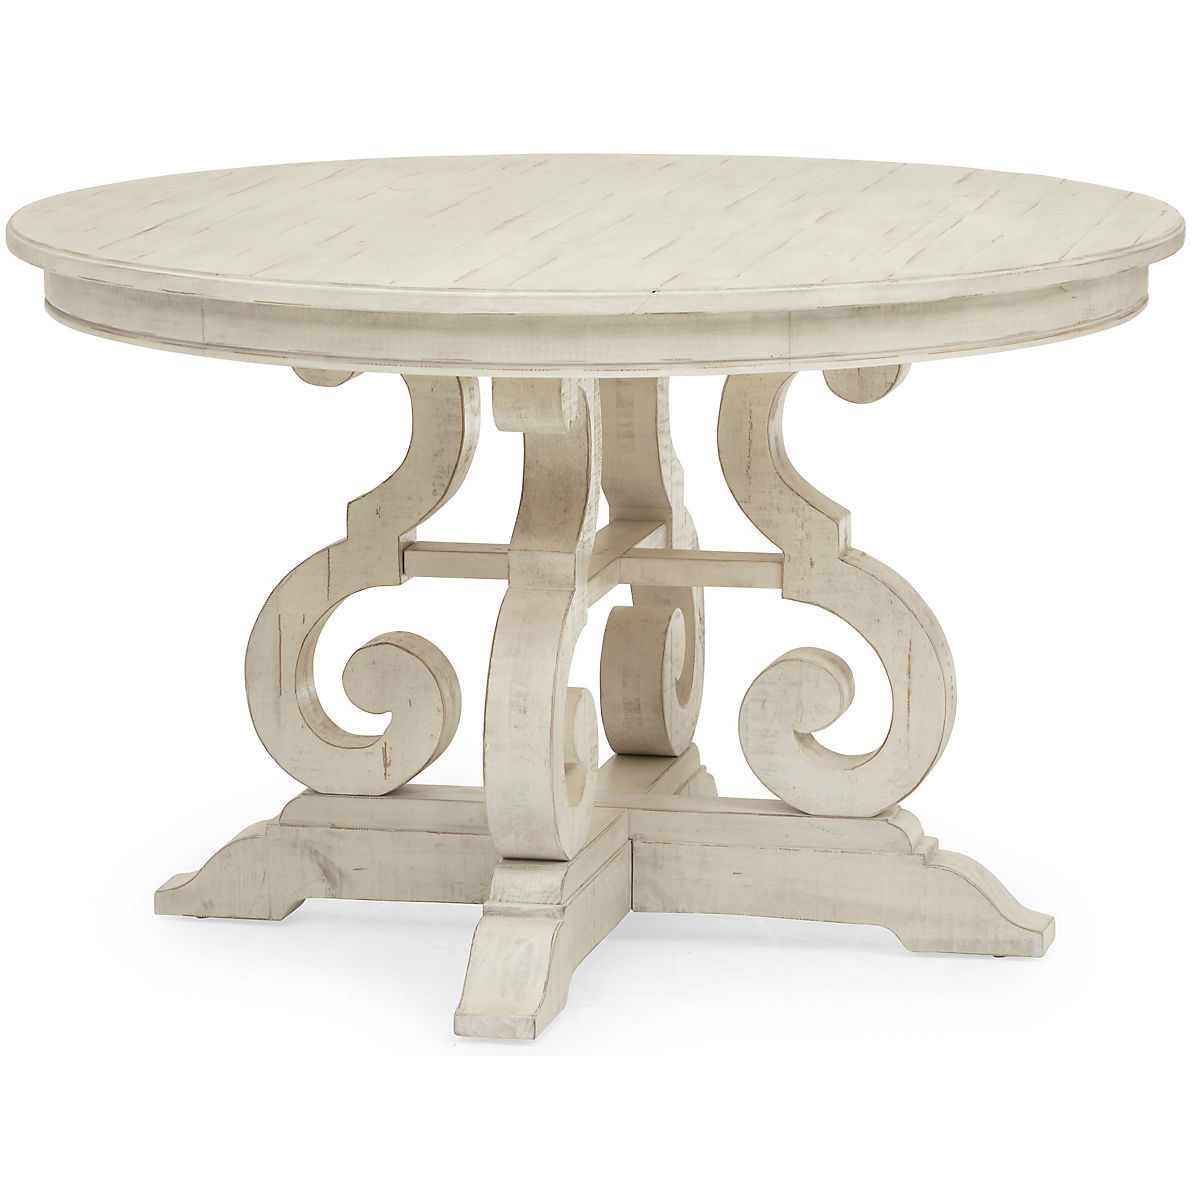 Treble 48 Inch Round Dining Table, 48 Round Pedestal Dining Table White